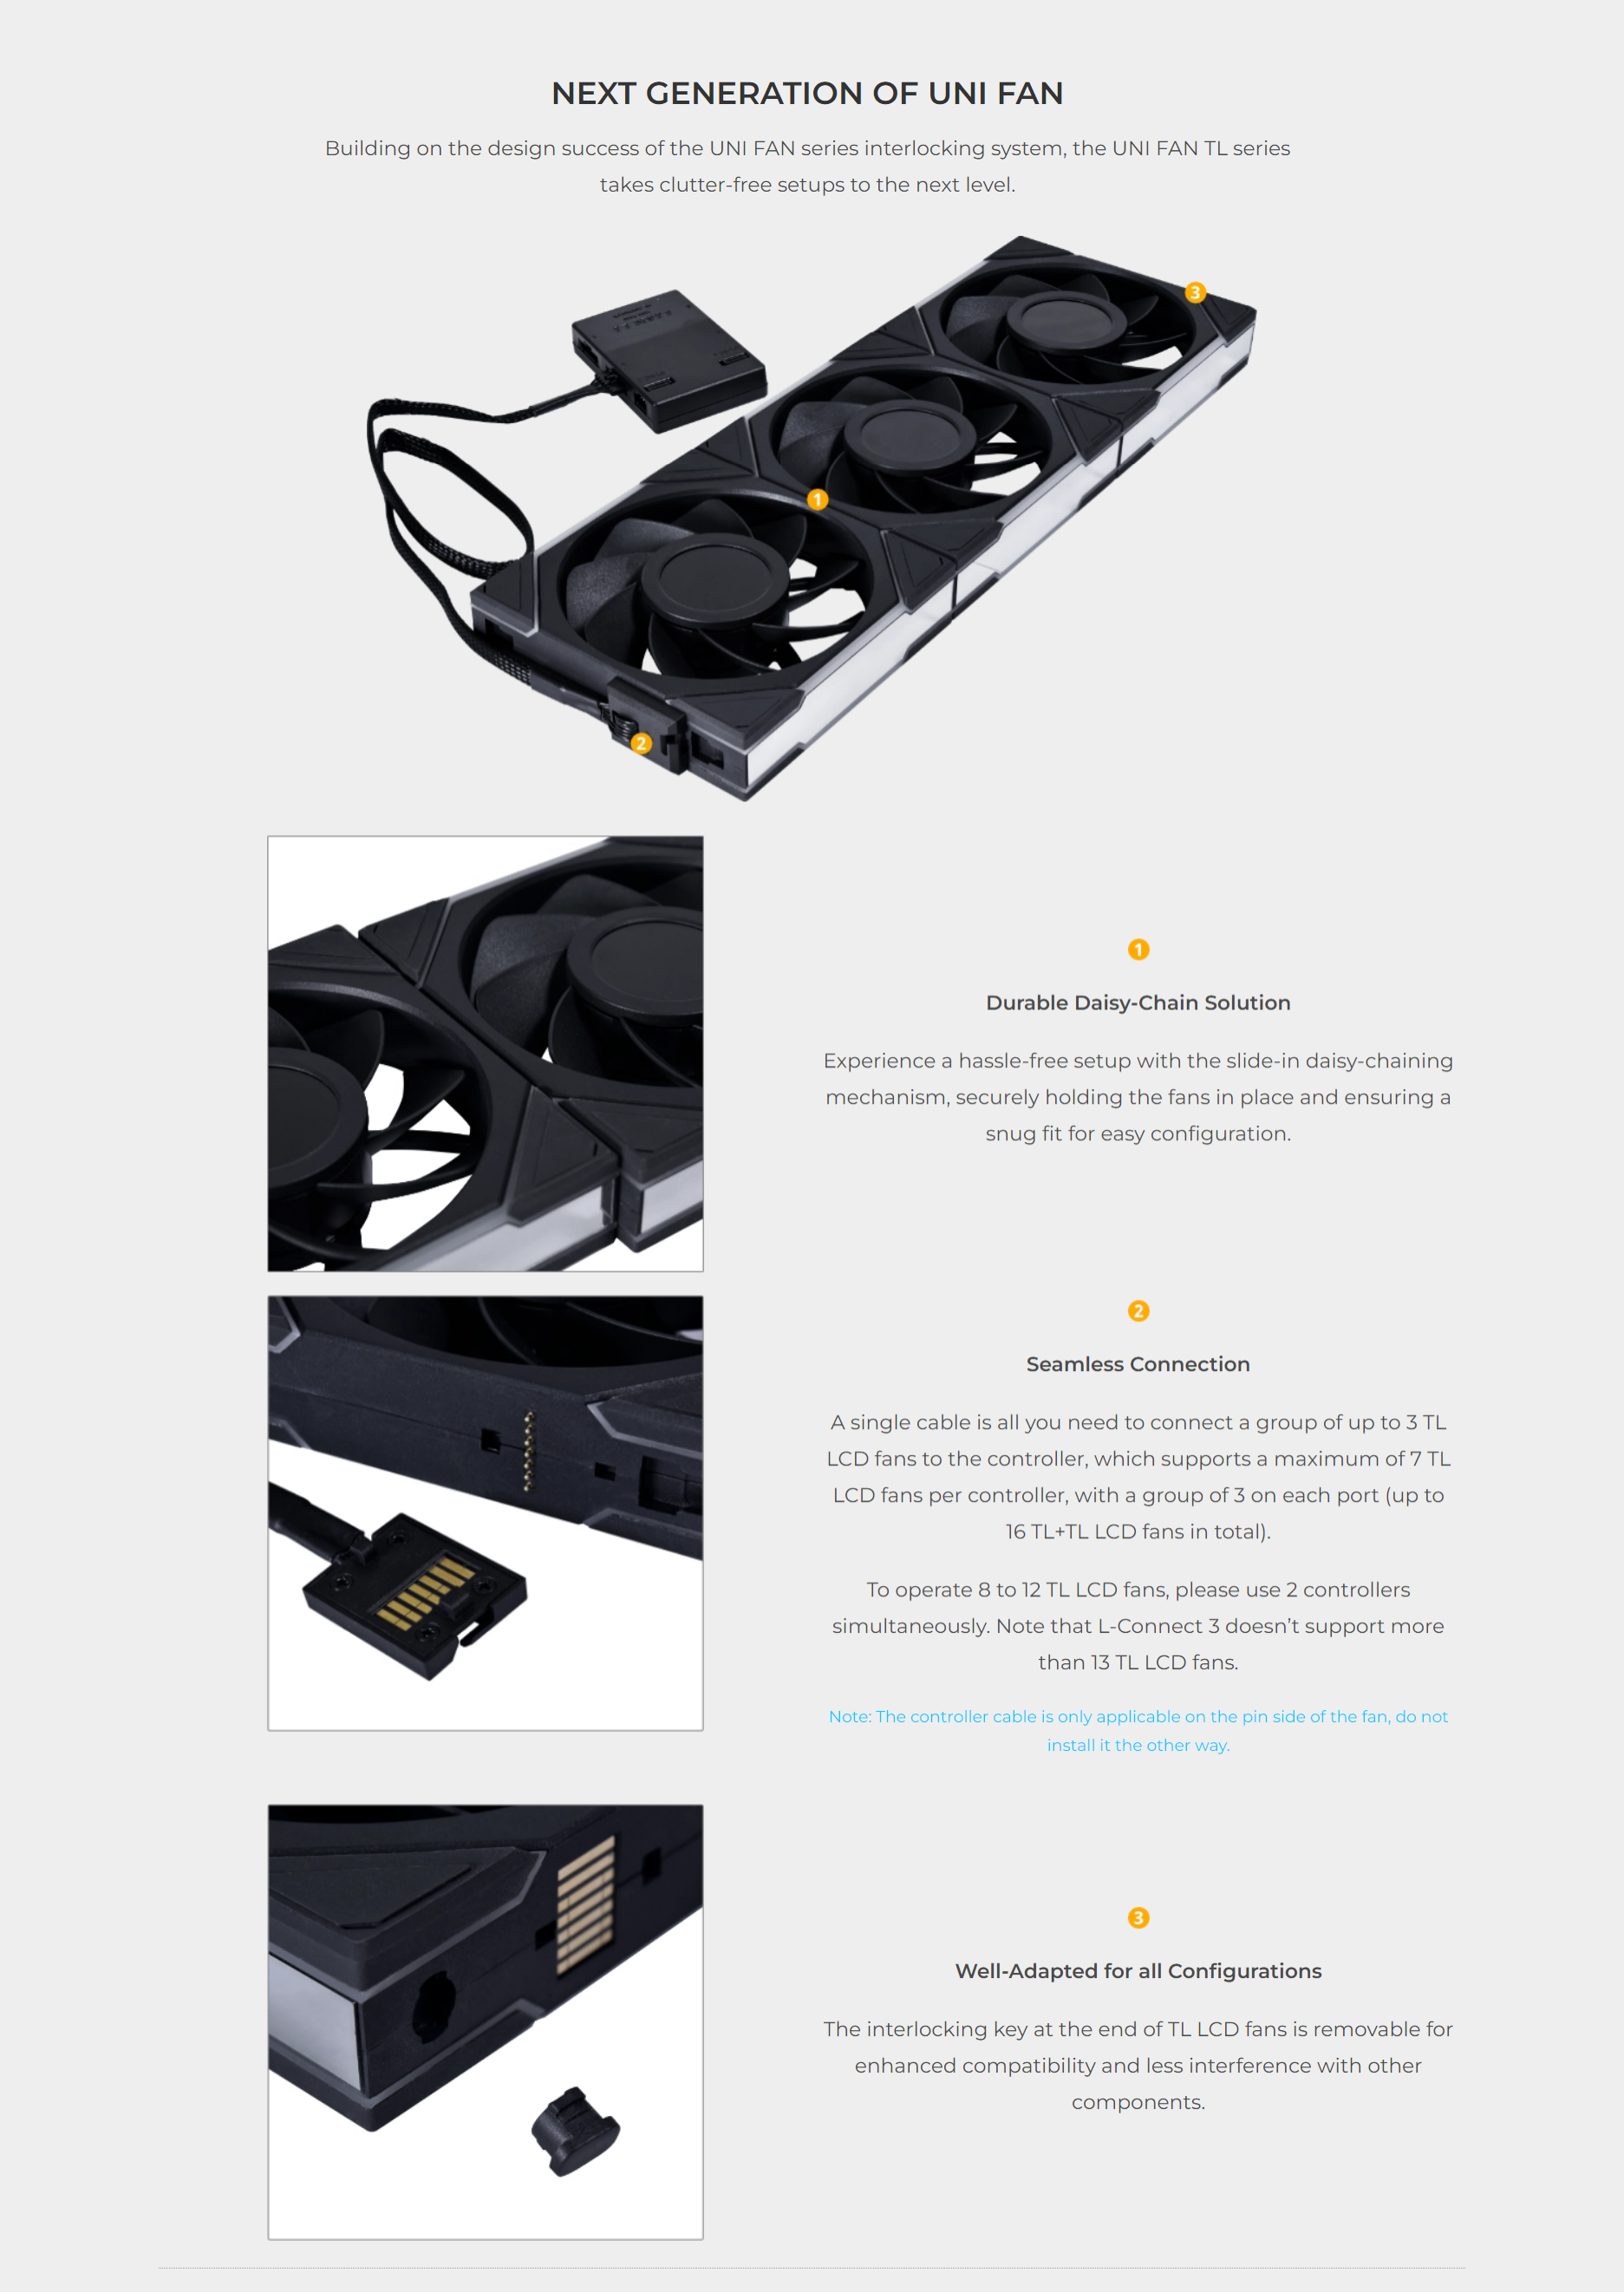 A large marketing image providing additional information about the product Lian Li UNI Fan TL LCD 120 120mm Fan Triple Pack - Black - Additional alt info not provided